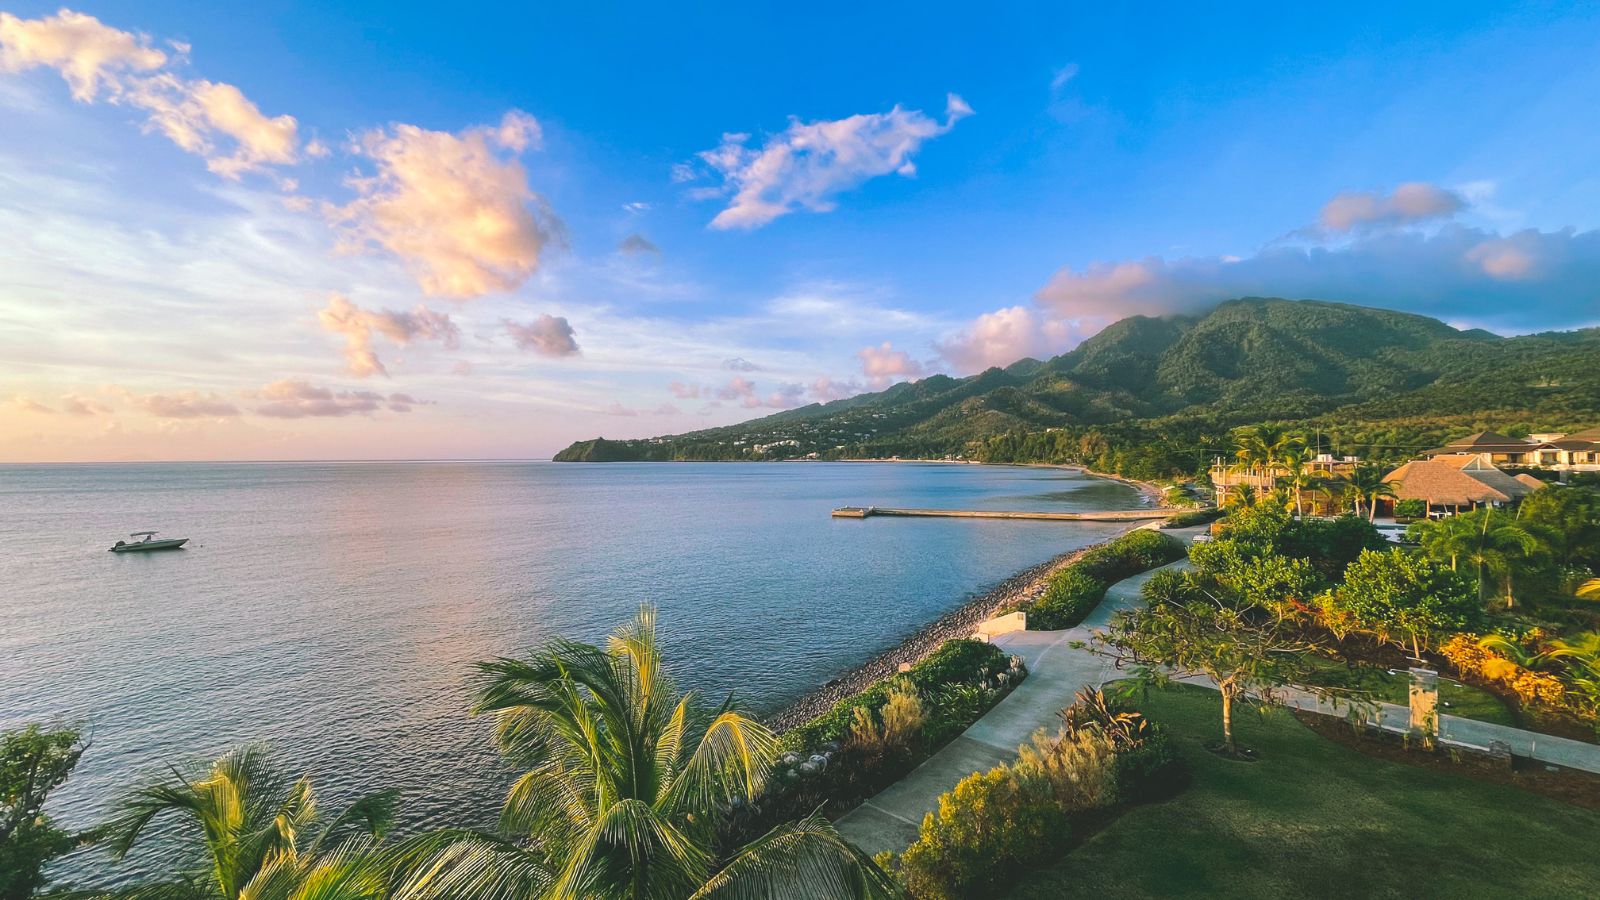 <p>What about the <a href="https://explorersaway.com/dominica-resorts/">resorts in Dominica</a>? You’ll have your pick from rainforest boutique retreats, quaint guesthouses by the sea, and sprawling oceanfront resorts. The <a href="https://www.ihg.com/intercontinental/hotels/us/en/portsmouth/dompr/hoteldetail">InterContinental Dominica Cabrits Resort & Spa</a> is one of the island’s newer resorts. Originally opened as a Kempinski hotel in 2019, it was recently acquired by IHG and is now better than ever.</p>